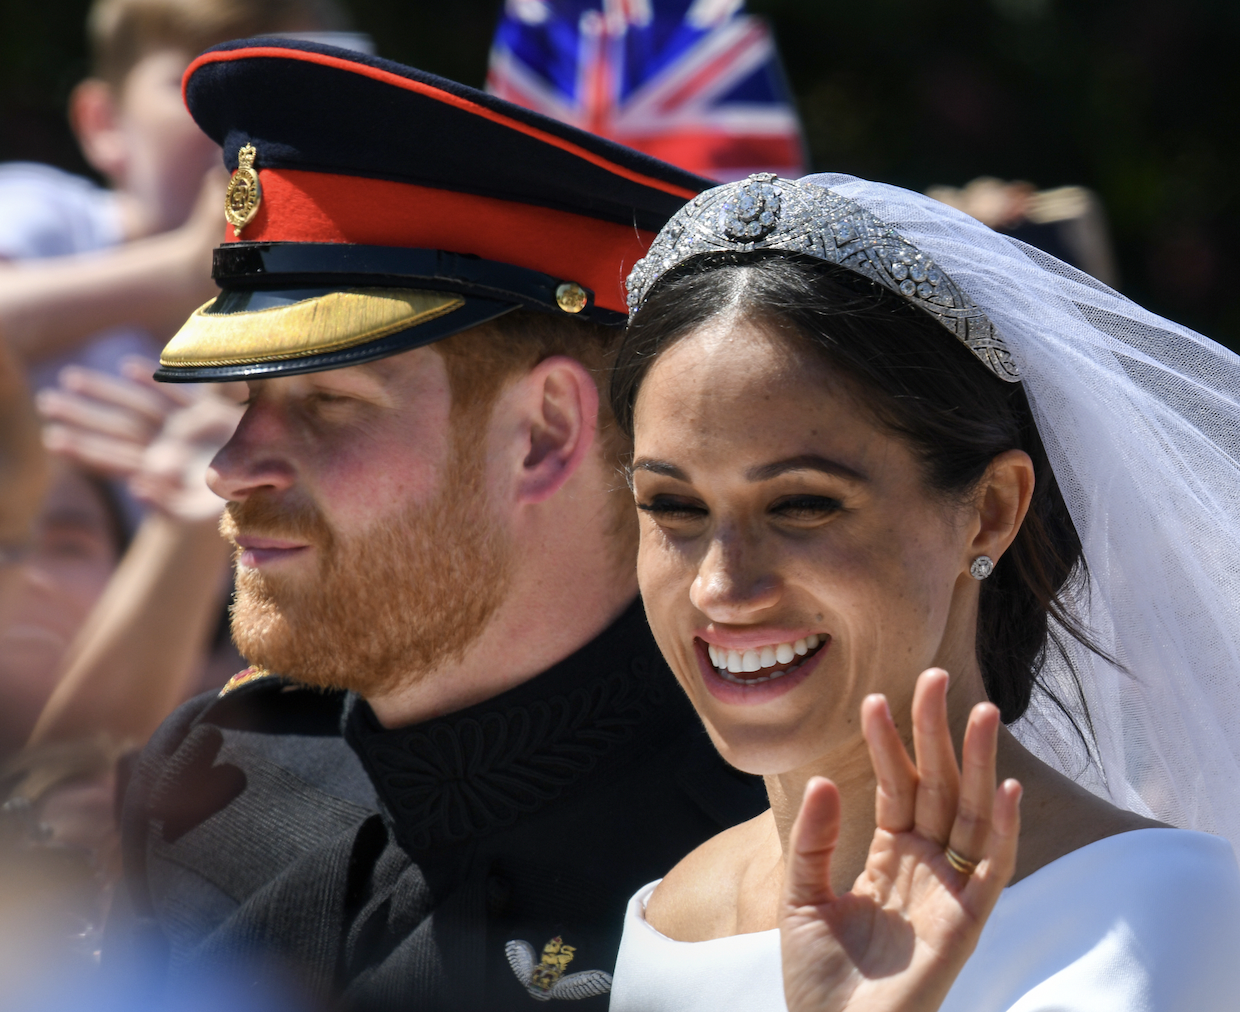 What Makes Hope Ranch A Better Option For Prince Harry & Meghan?